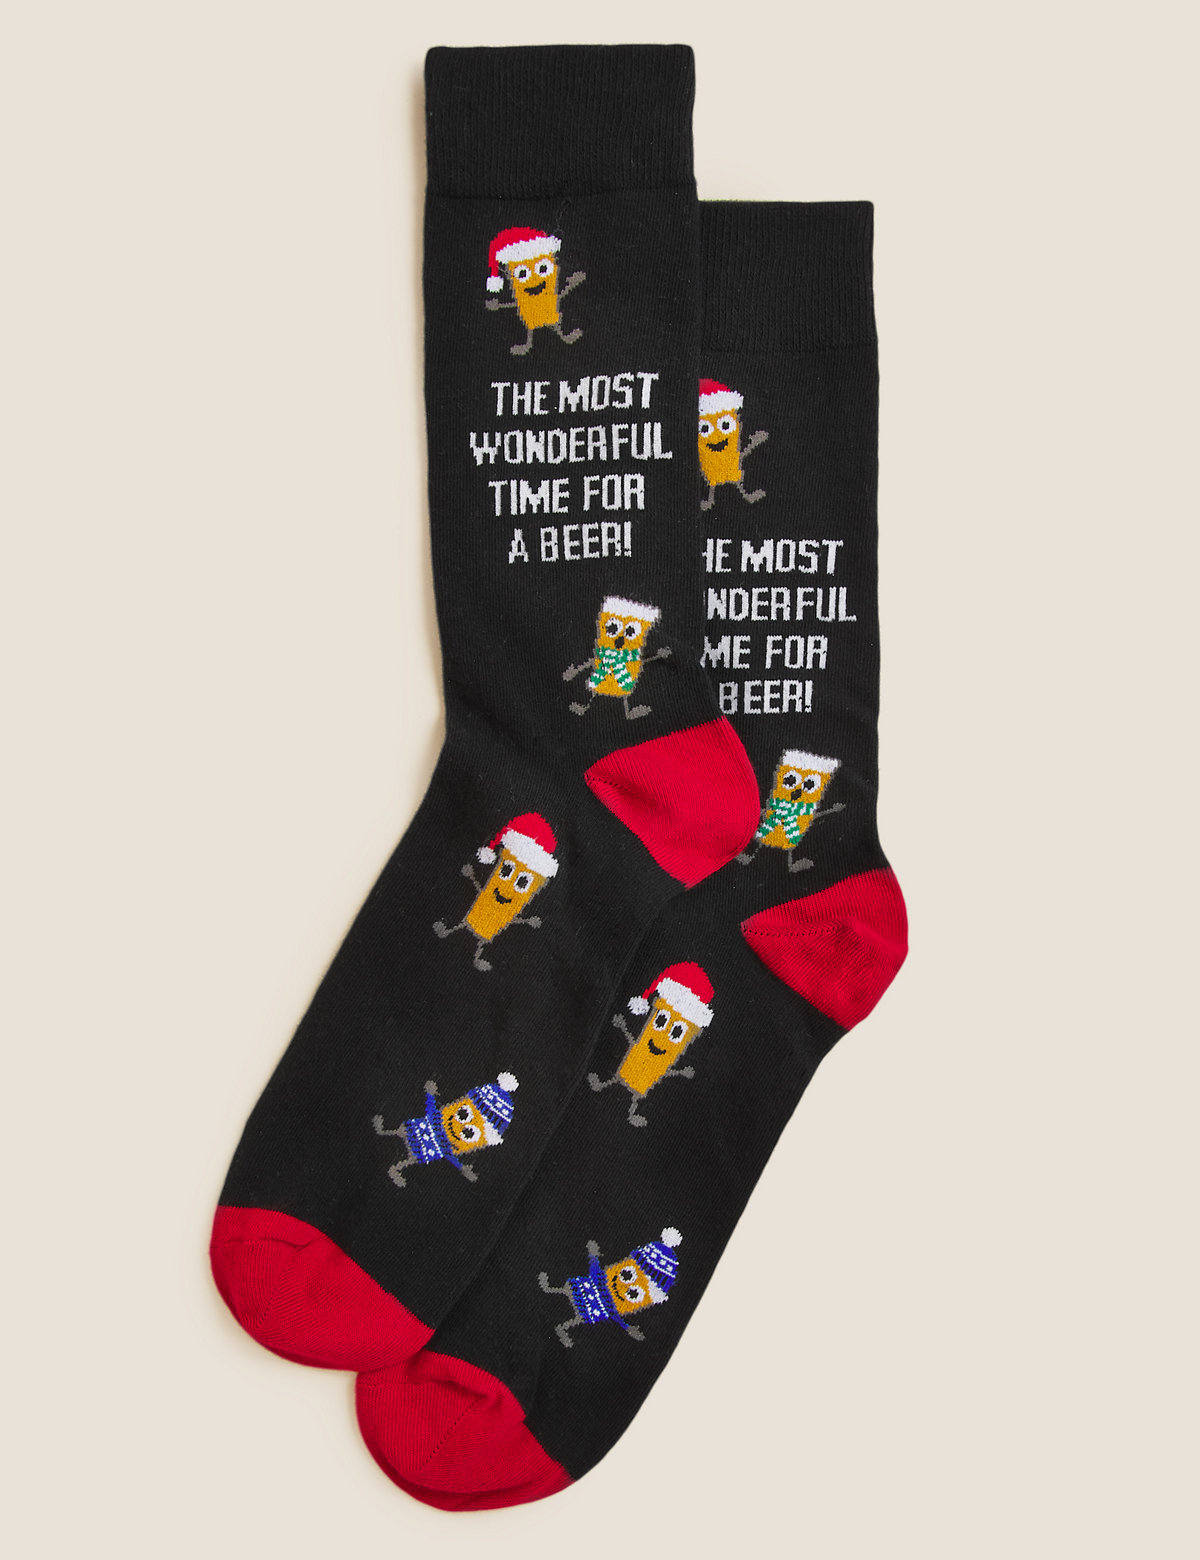 Most Wonderful Time for a Beer Socks